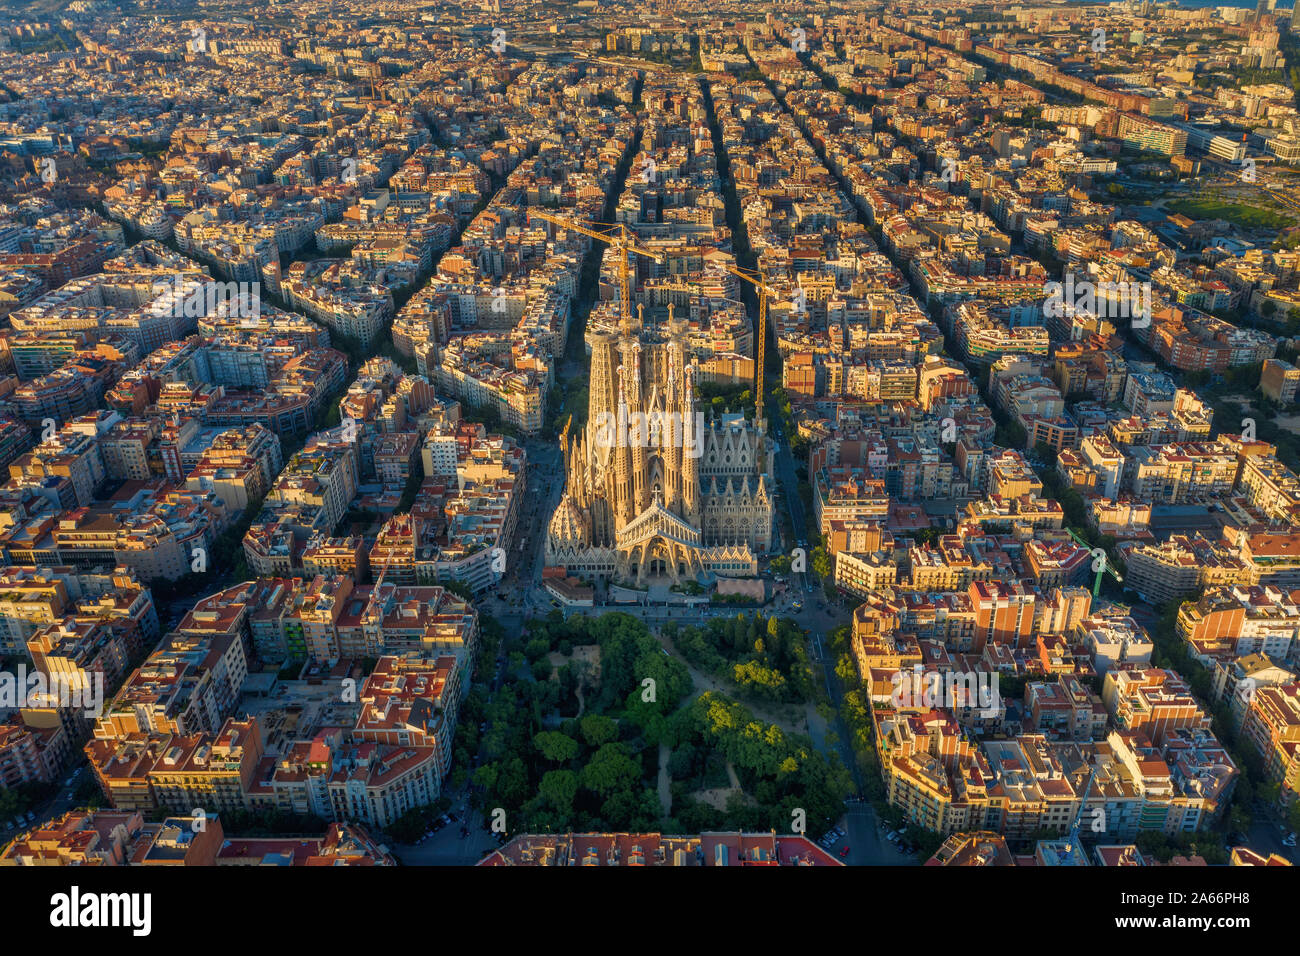 Spain, Catalunya, Barcelona, Aerial view of Eixample district and Sagrada Familia Cathedral Stock Photo